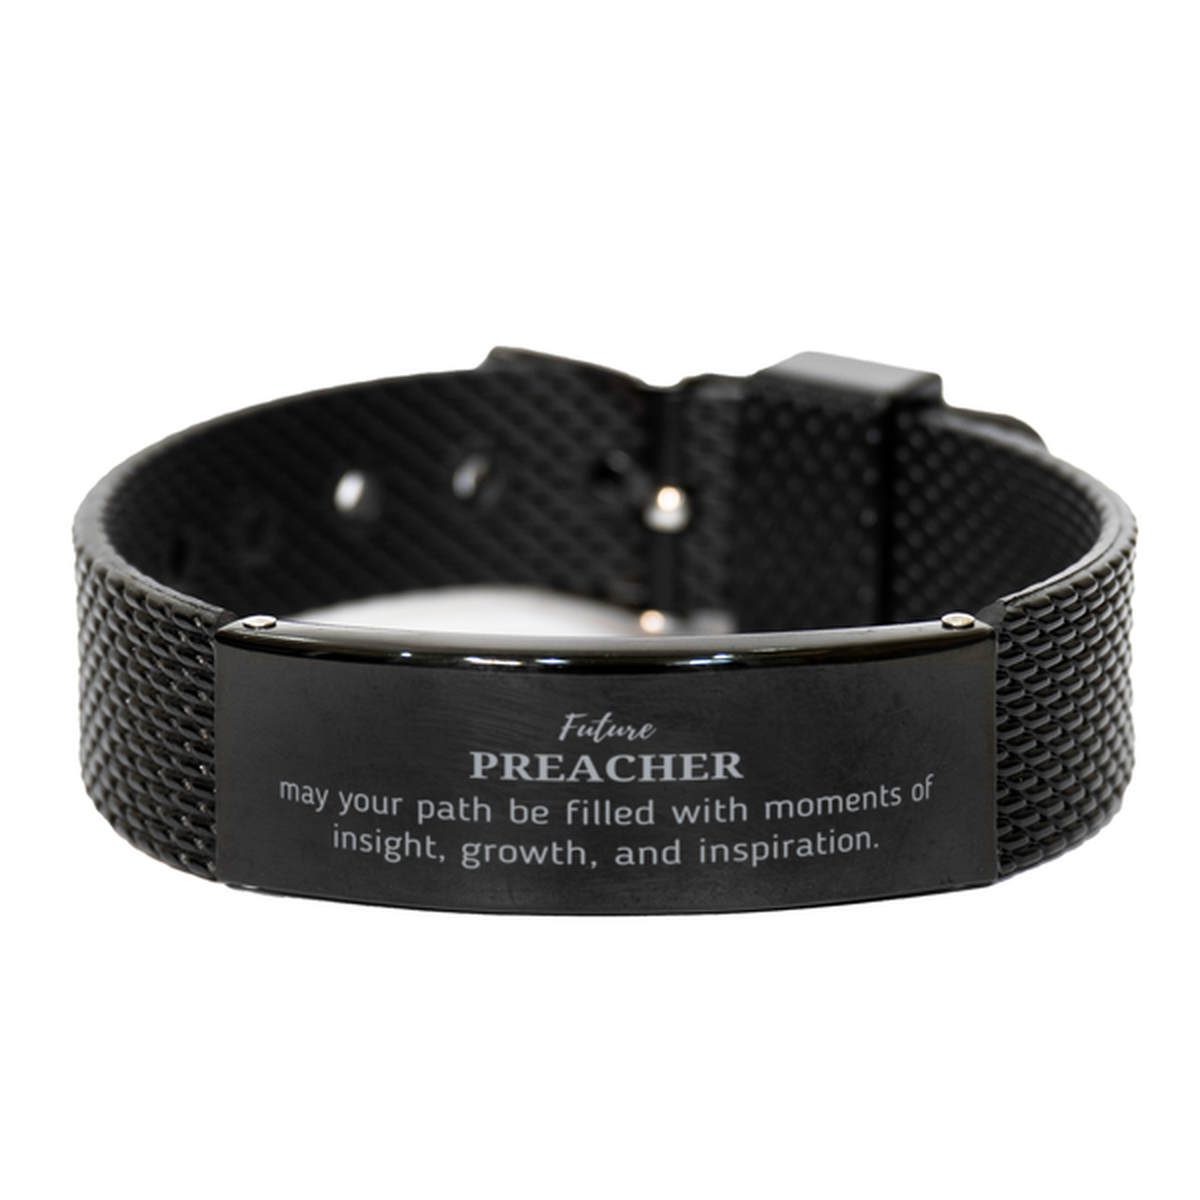 Future Preacher Gifts, May your path be filled with moments of insight, Graduation Gifts for New Preacher, Christmas Unique Black Shark Mesh Bracelet For Men, Women, Friends